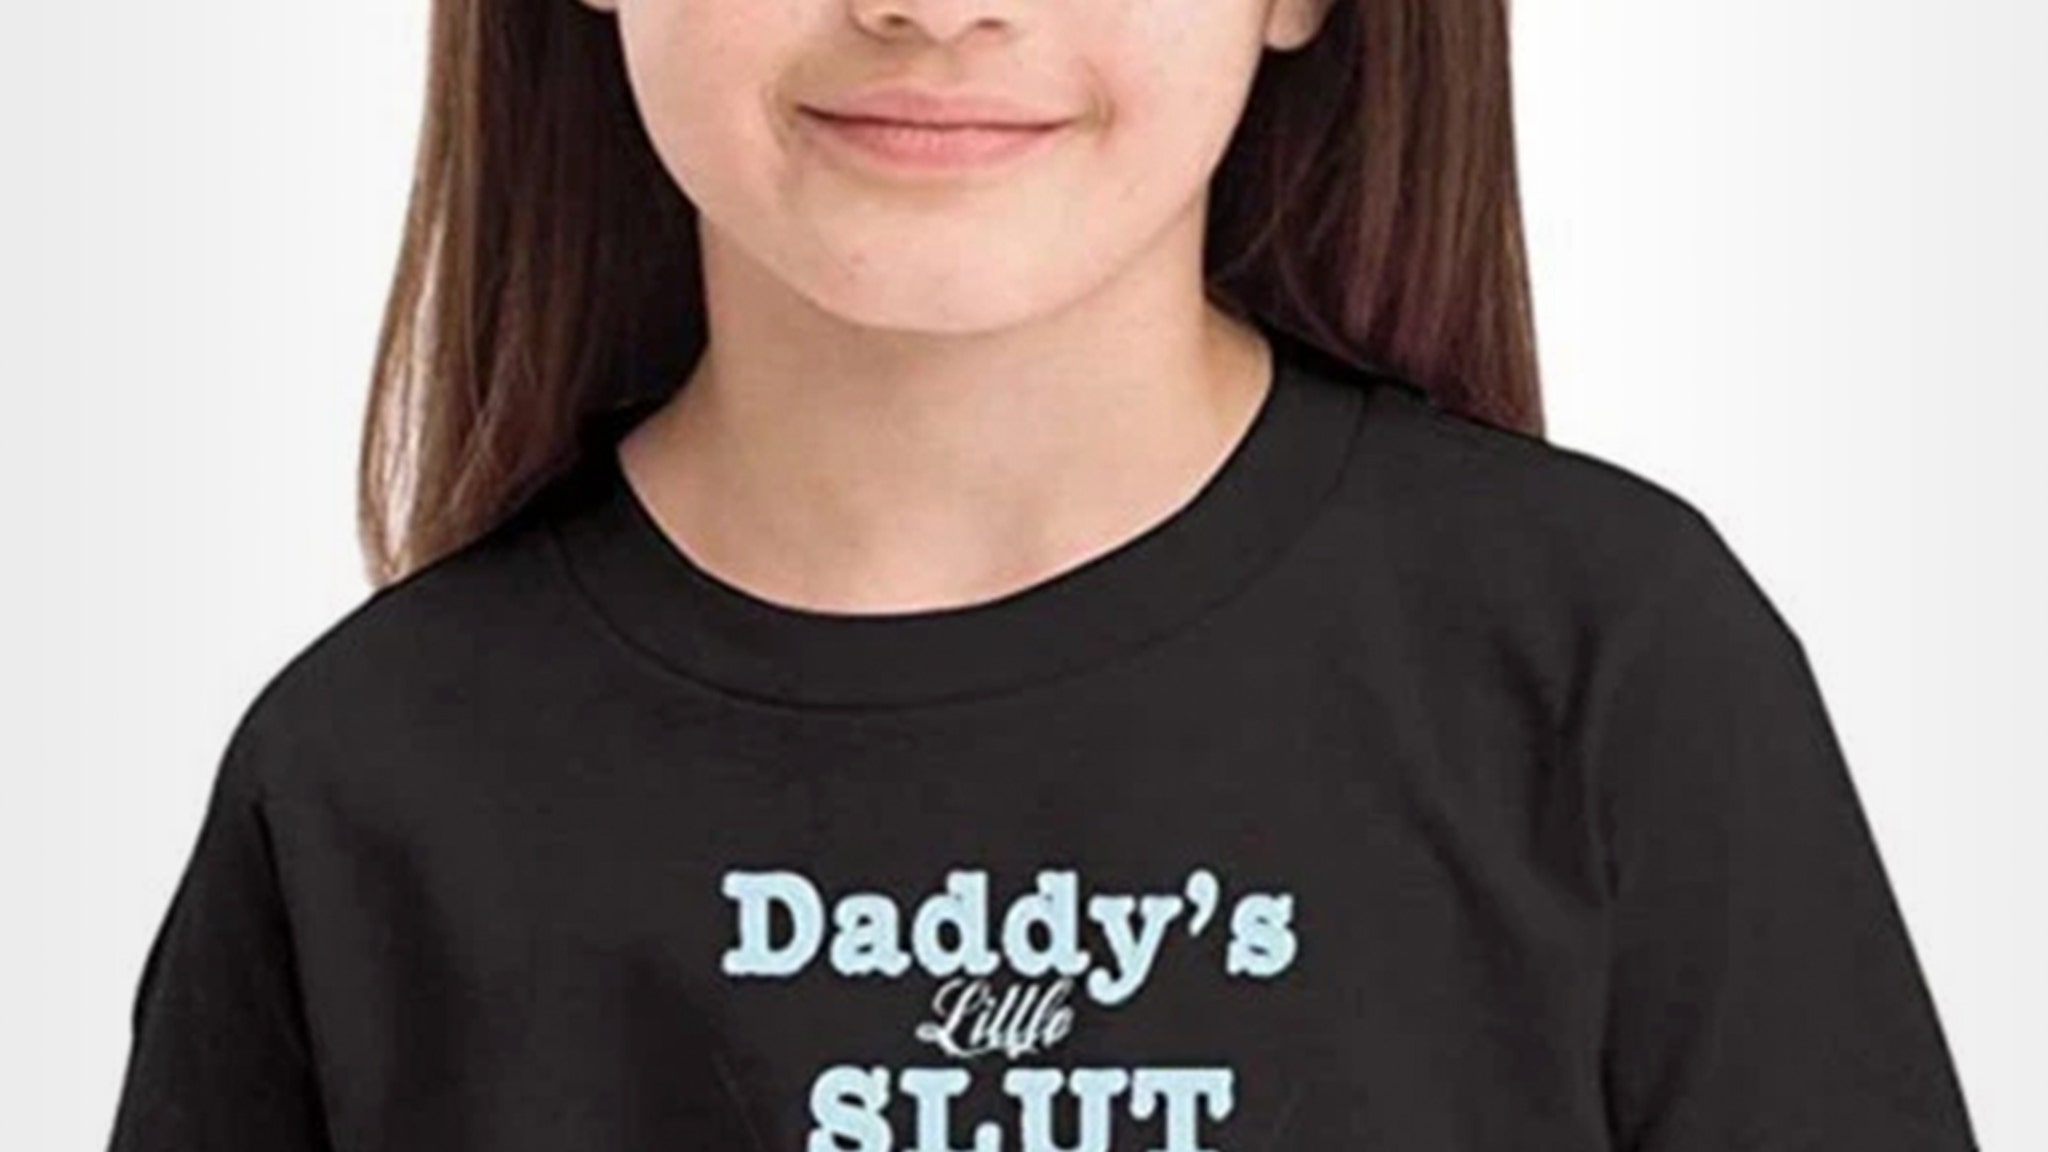 Daddys Little Slut Shirt Yanked From Amazon After Uproar